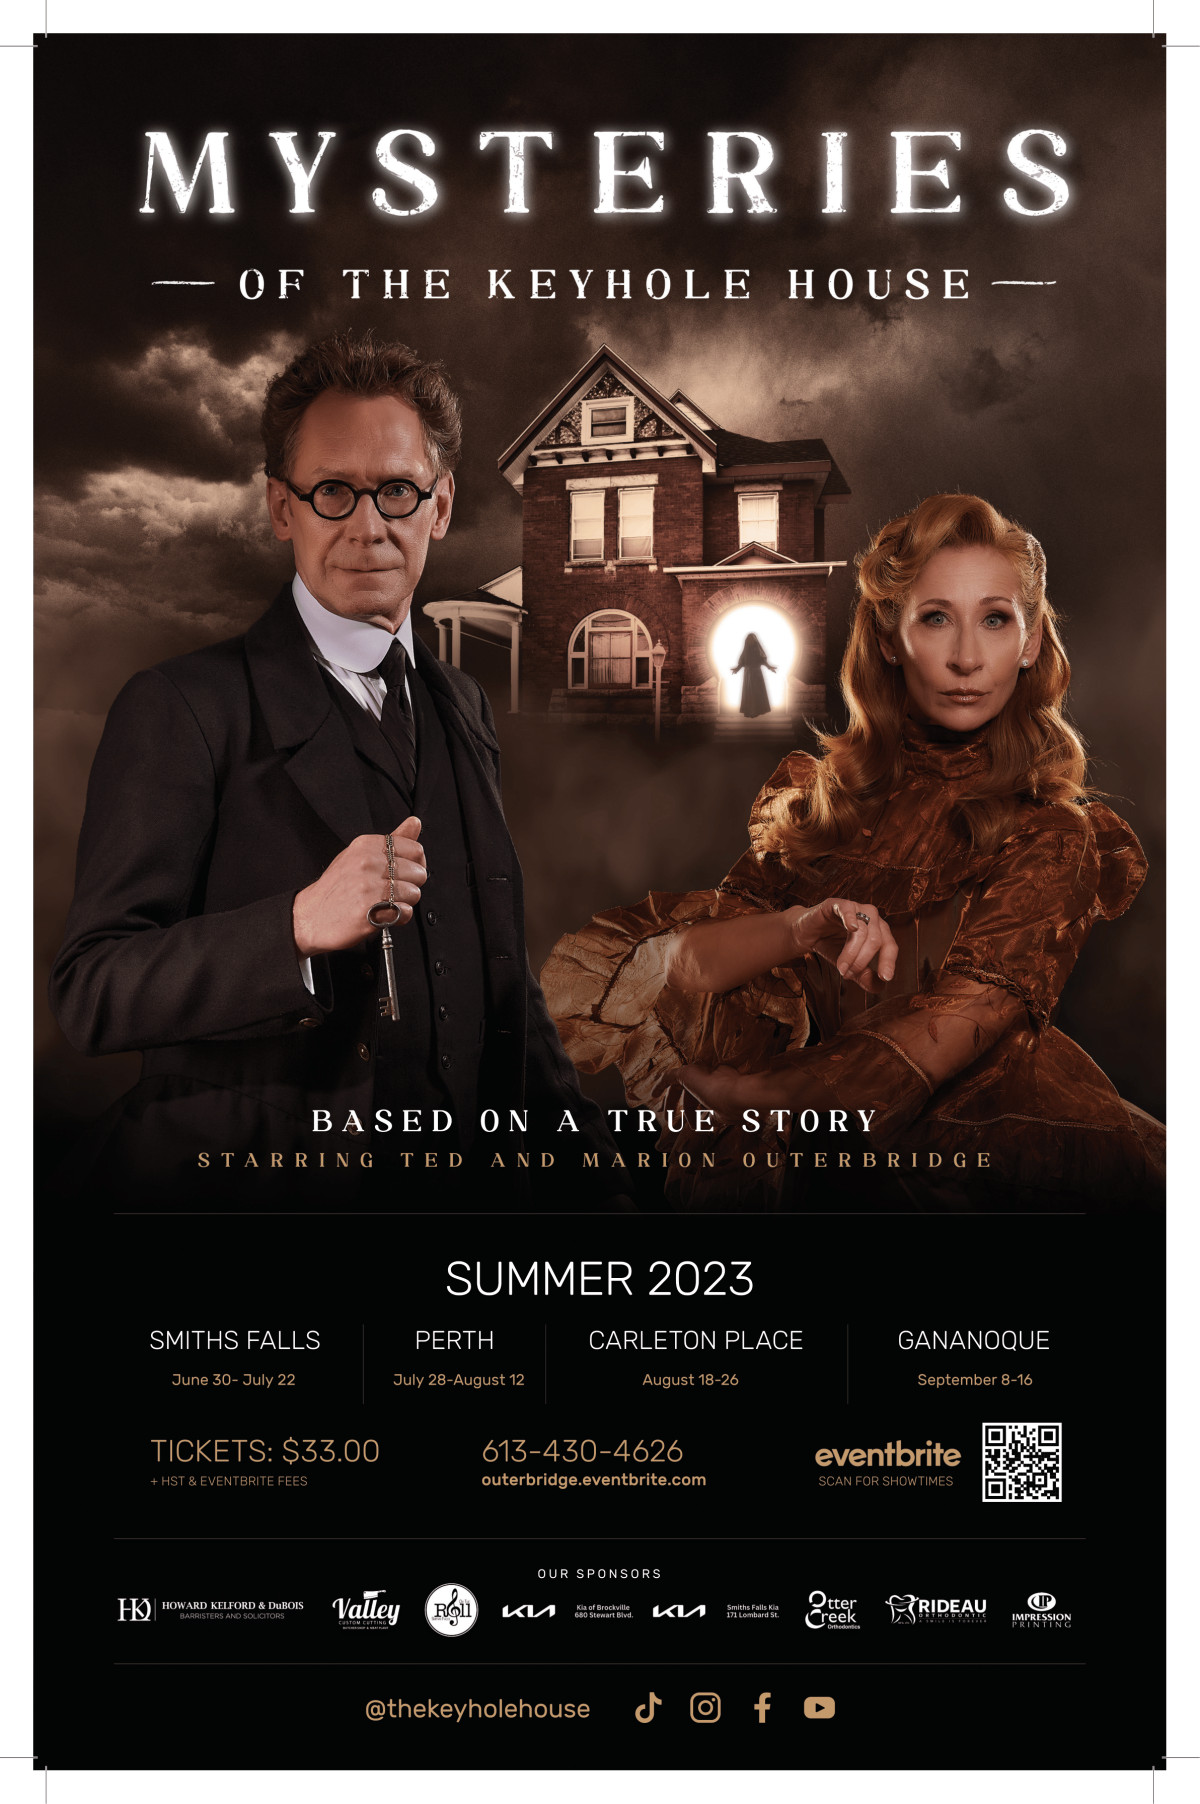 Show poster with Ted and Marion Outerbridge